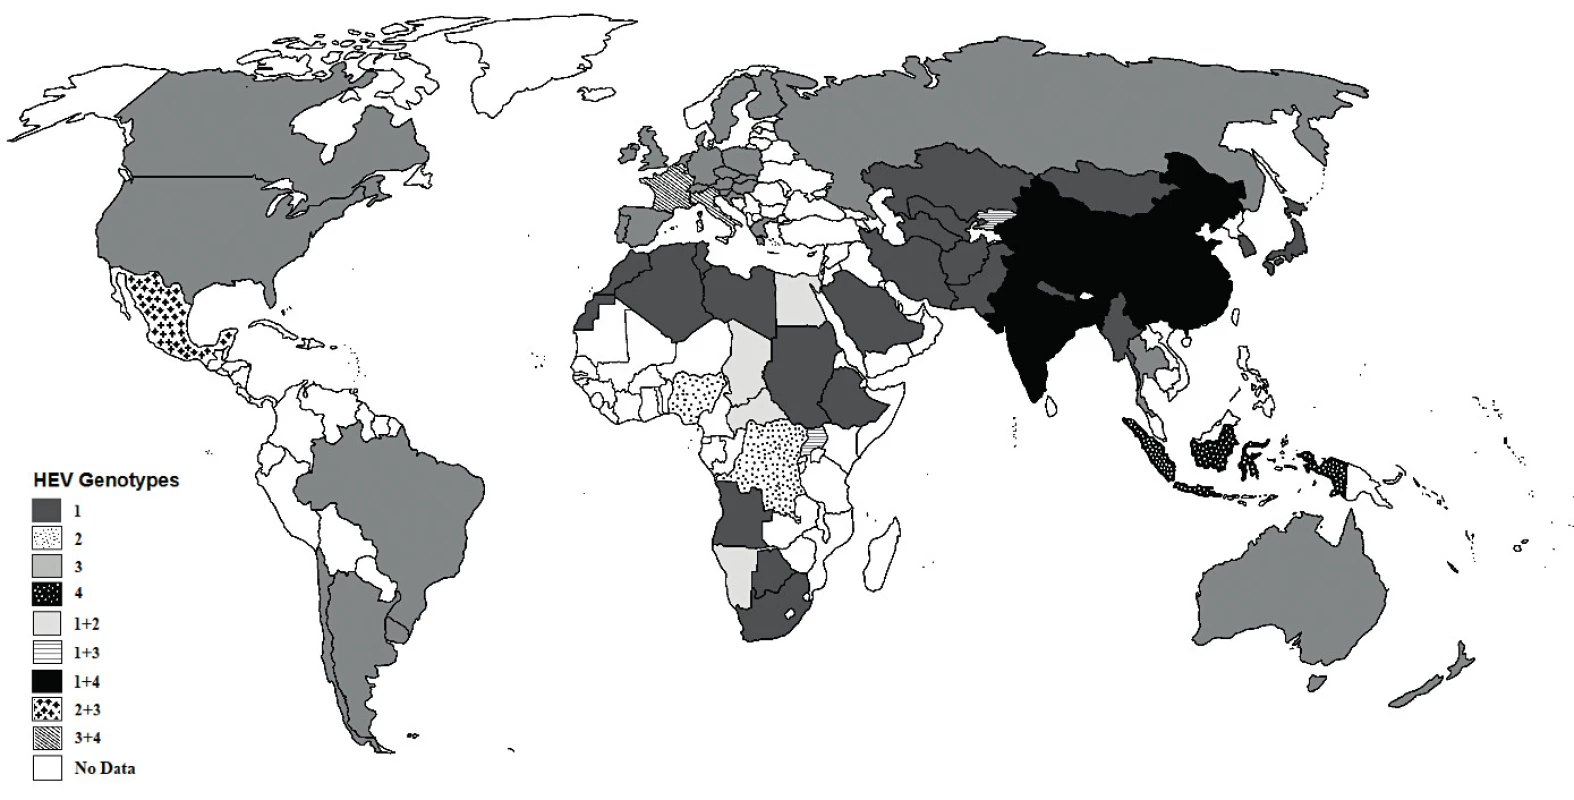 The Dominating HEV Genotypes in the World. Data Adjusted
According [22, 60, 77].